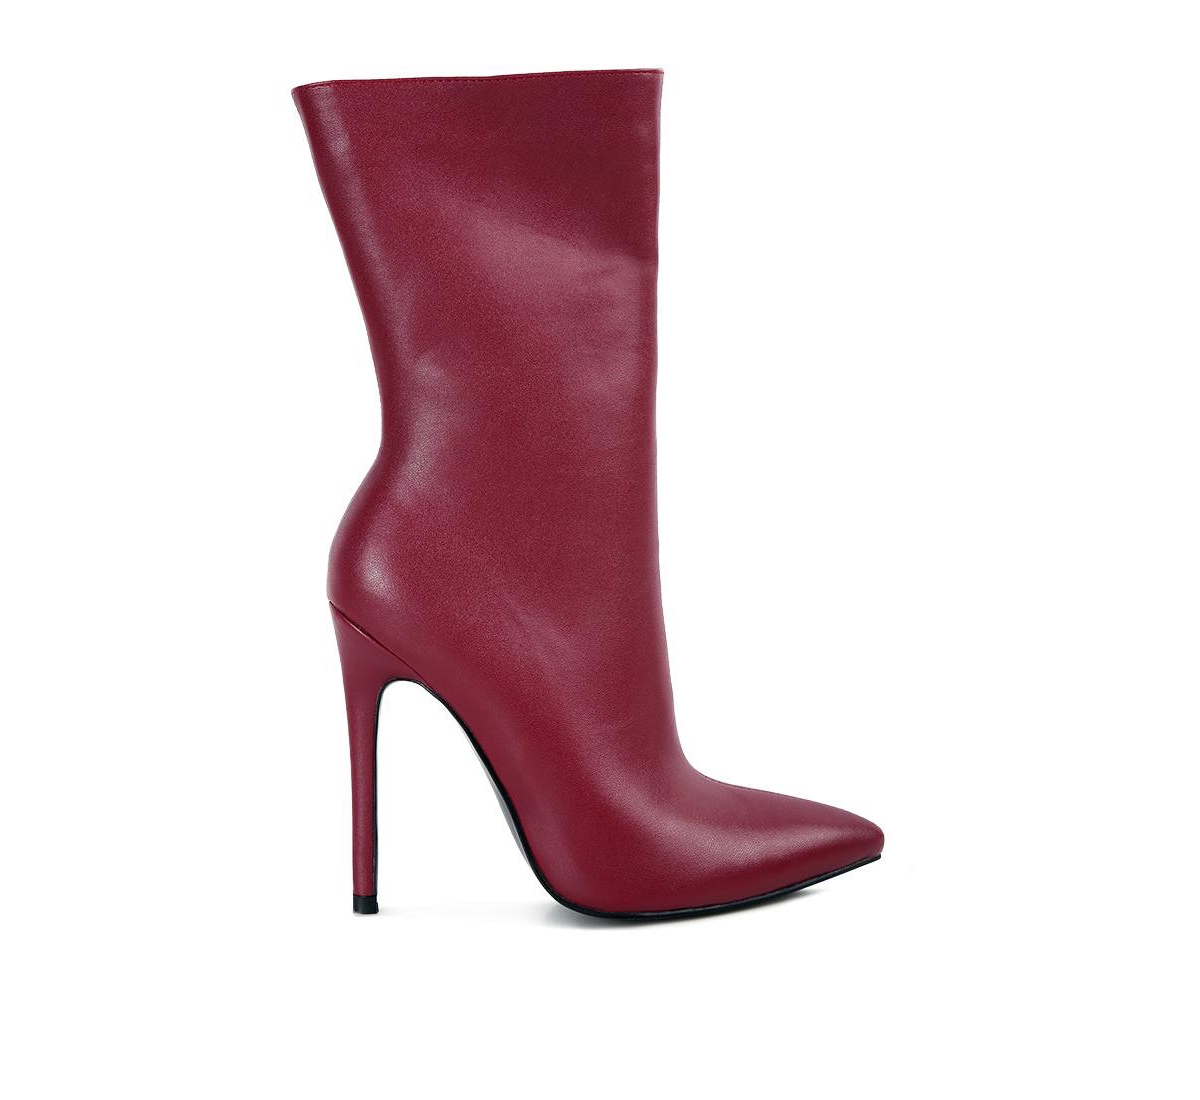 micah pointed toe stiletto high ankle boots - Red